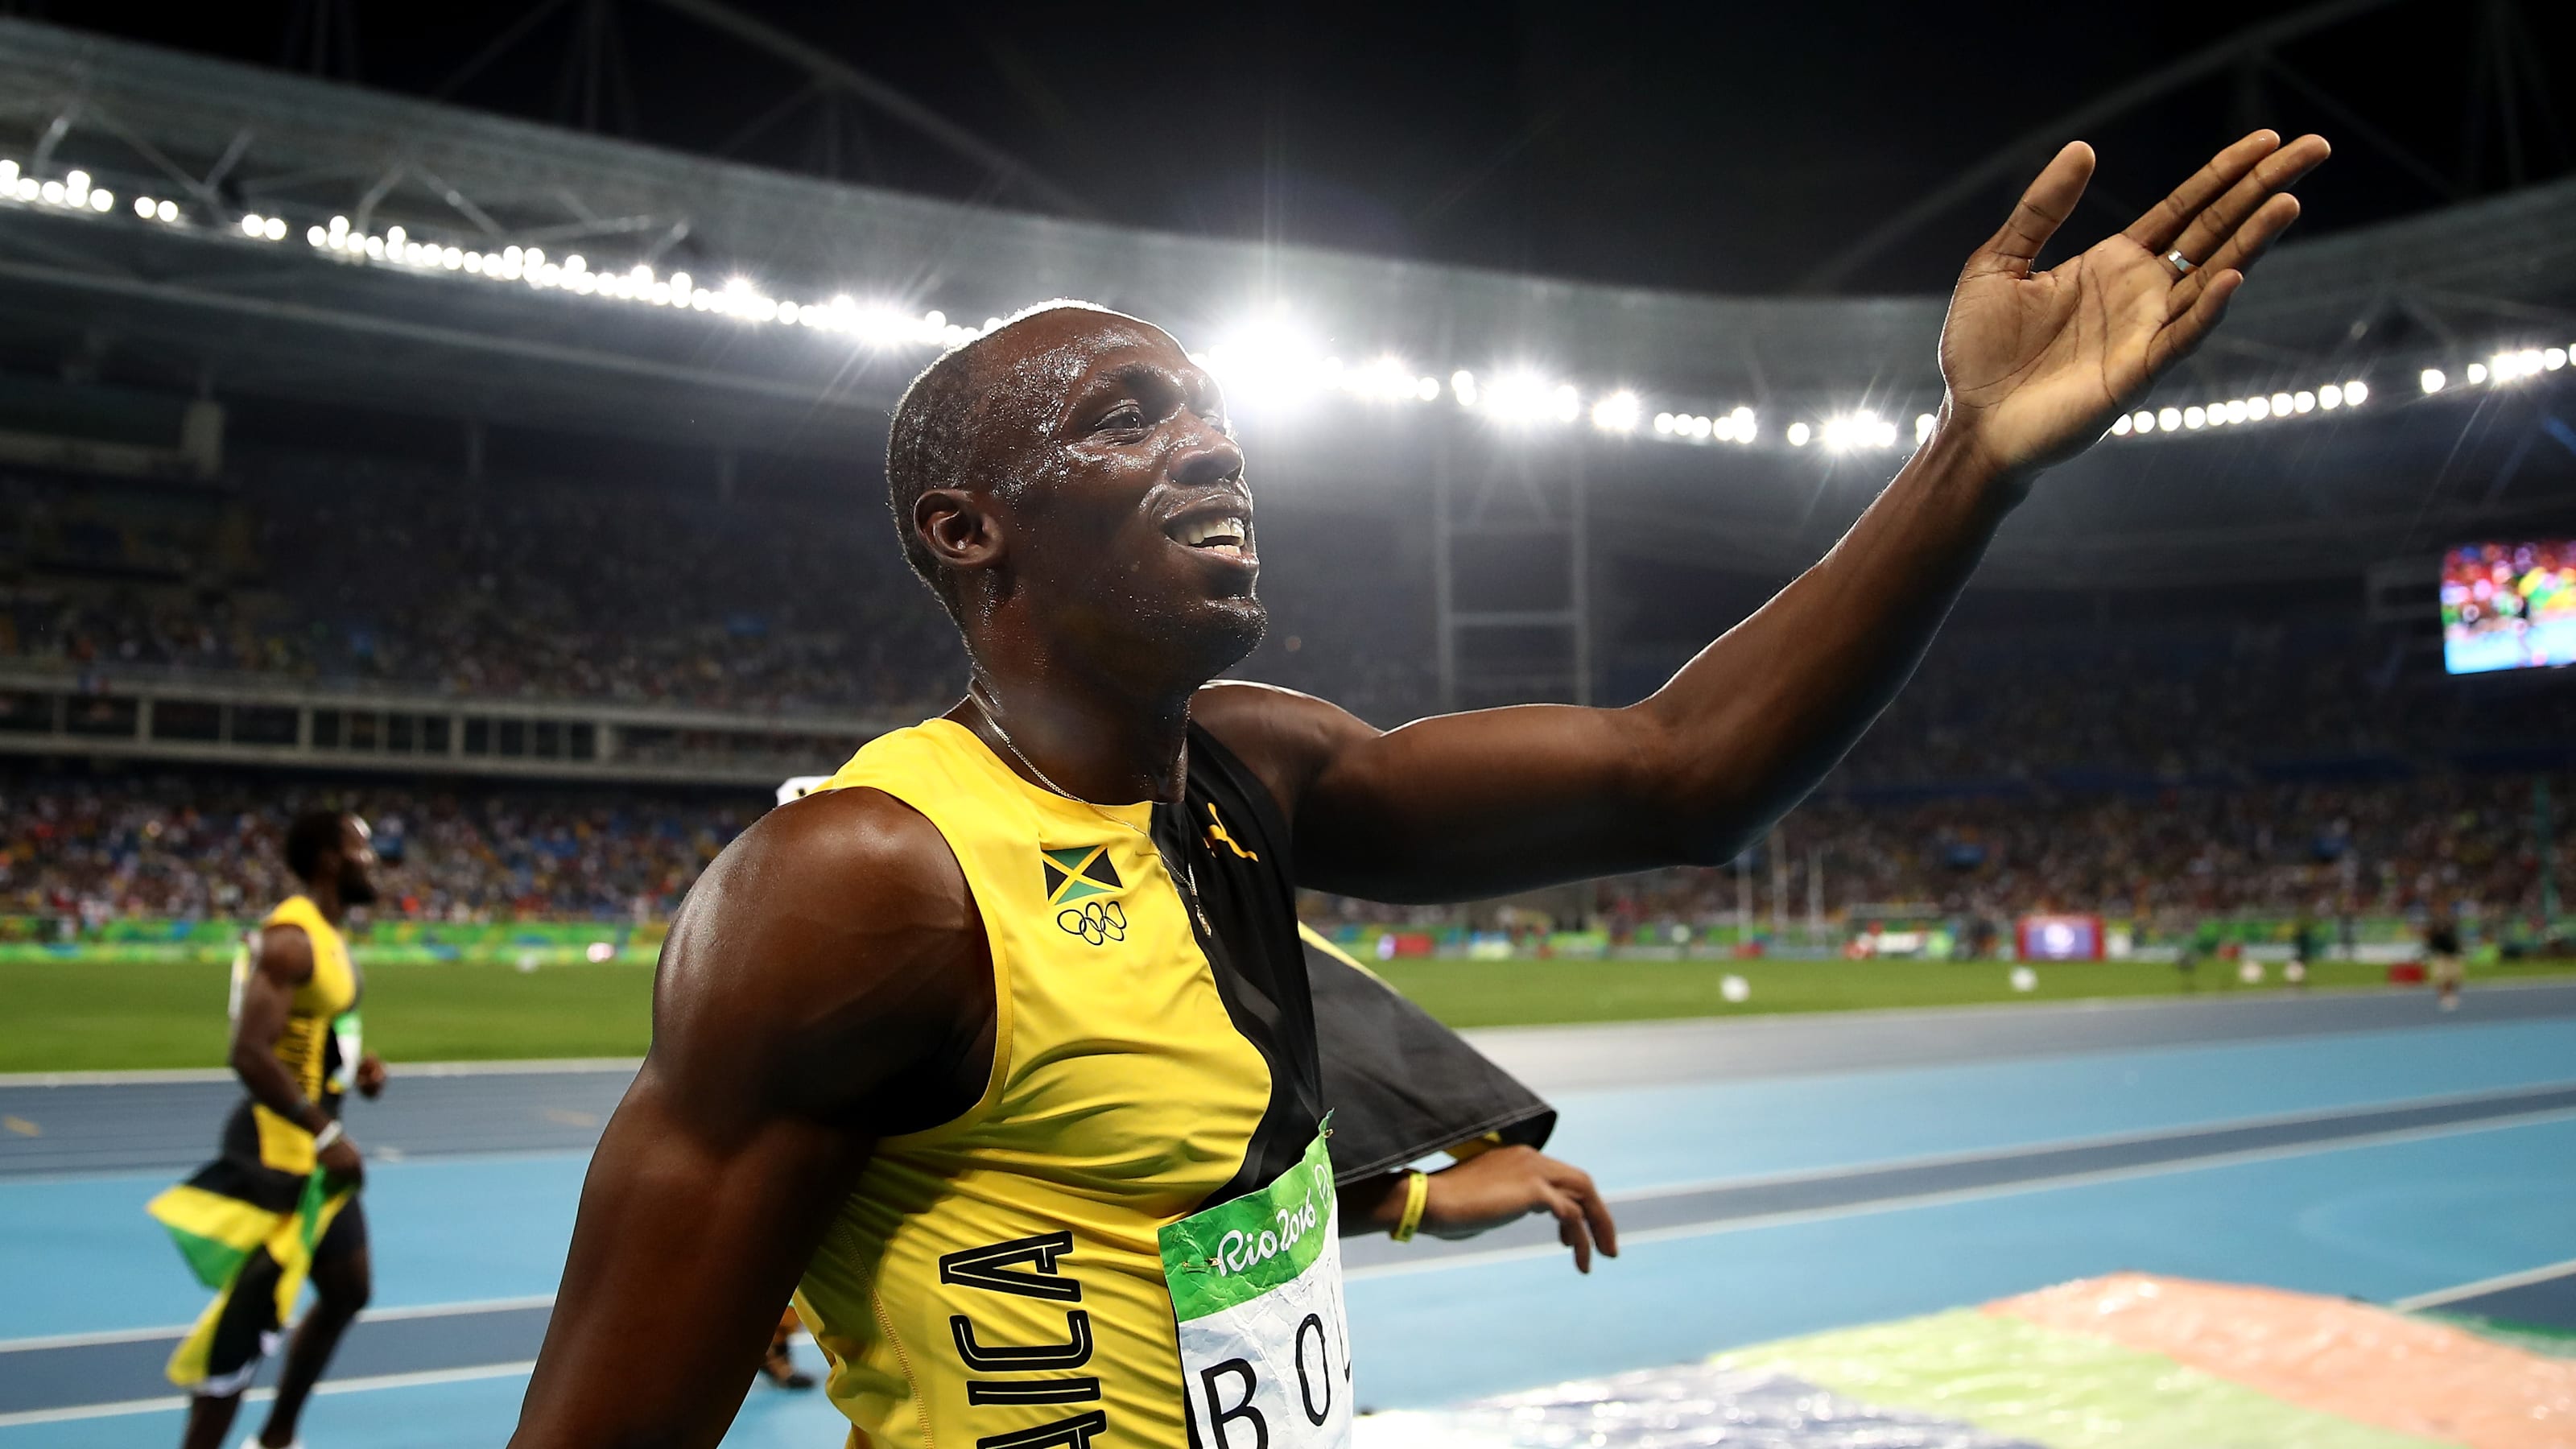 Usain retired why bolt When did